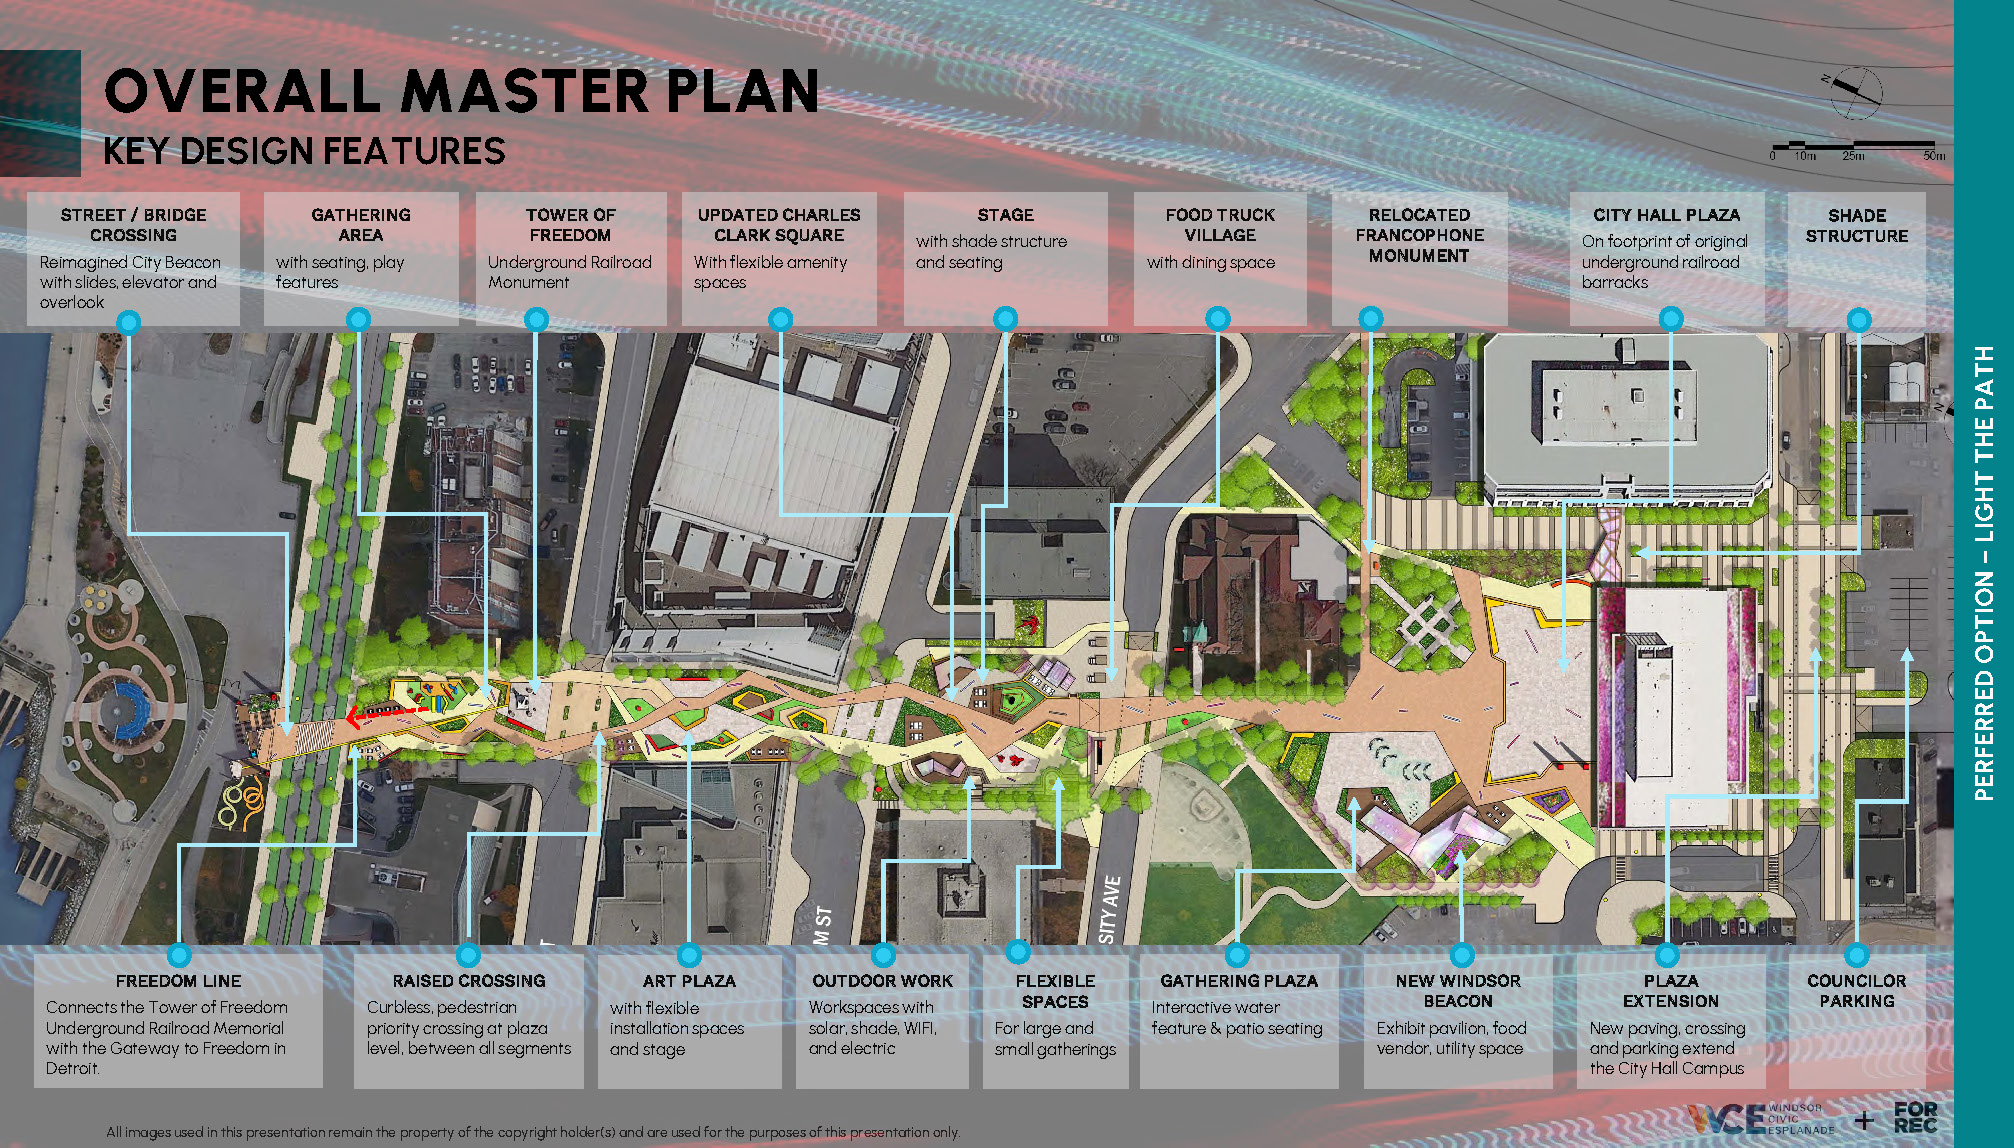 Overall Master Plan map of key design features